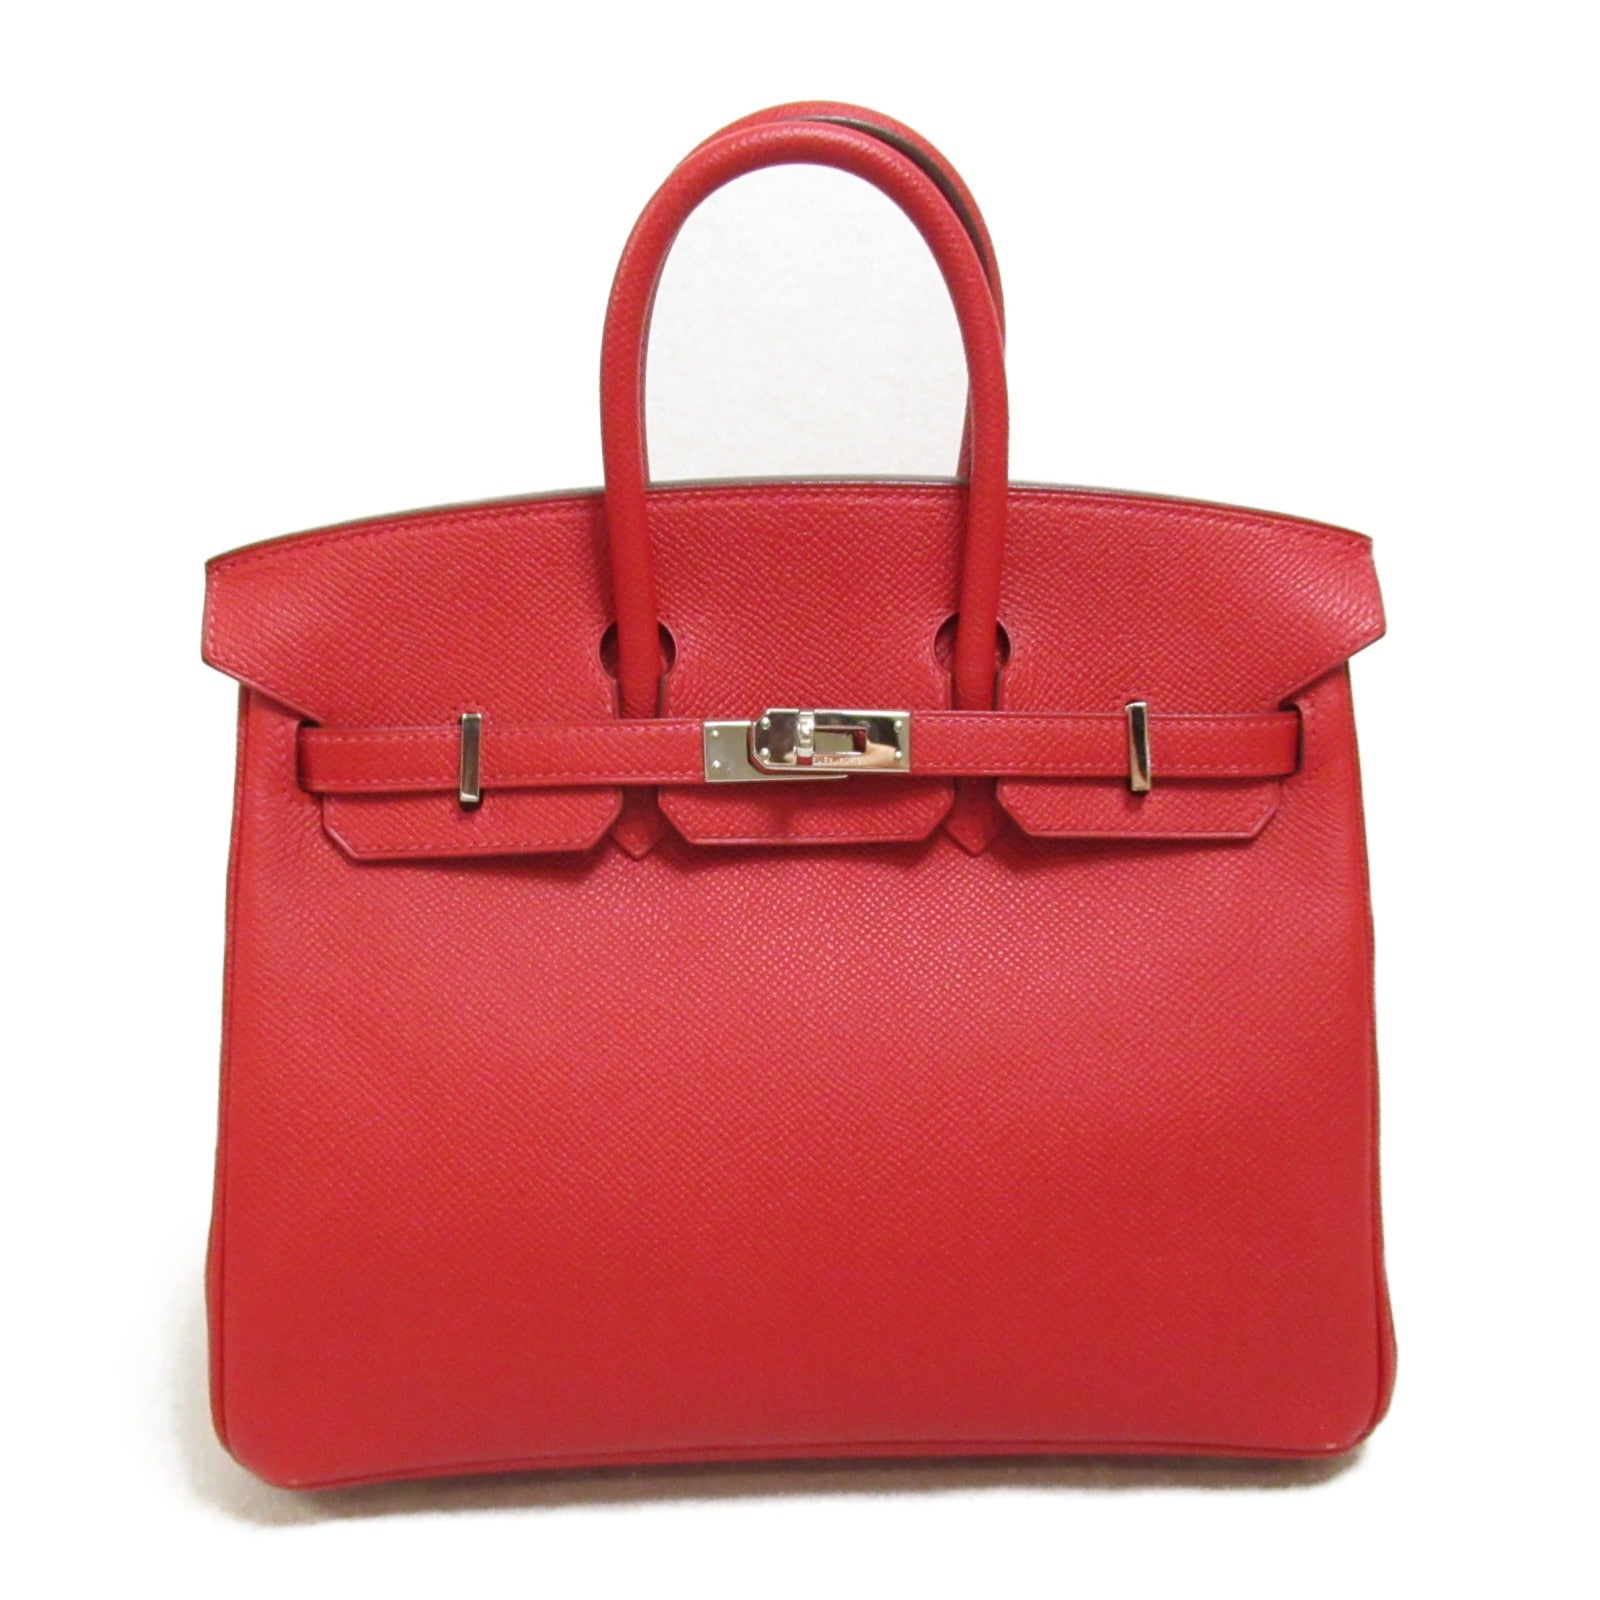 Hermes Hermes Birkin 25 Handbag Handbag Handbag Handbags Leather Epson  Red